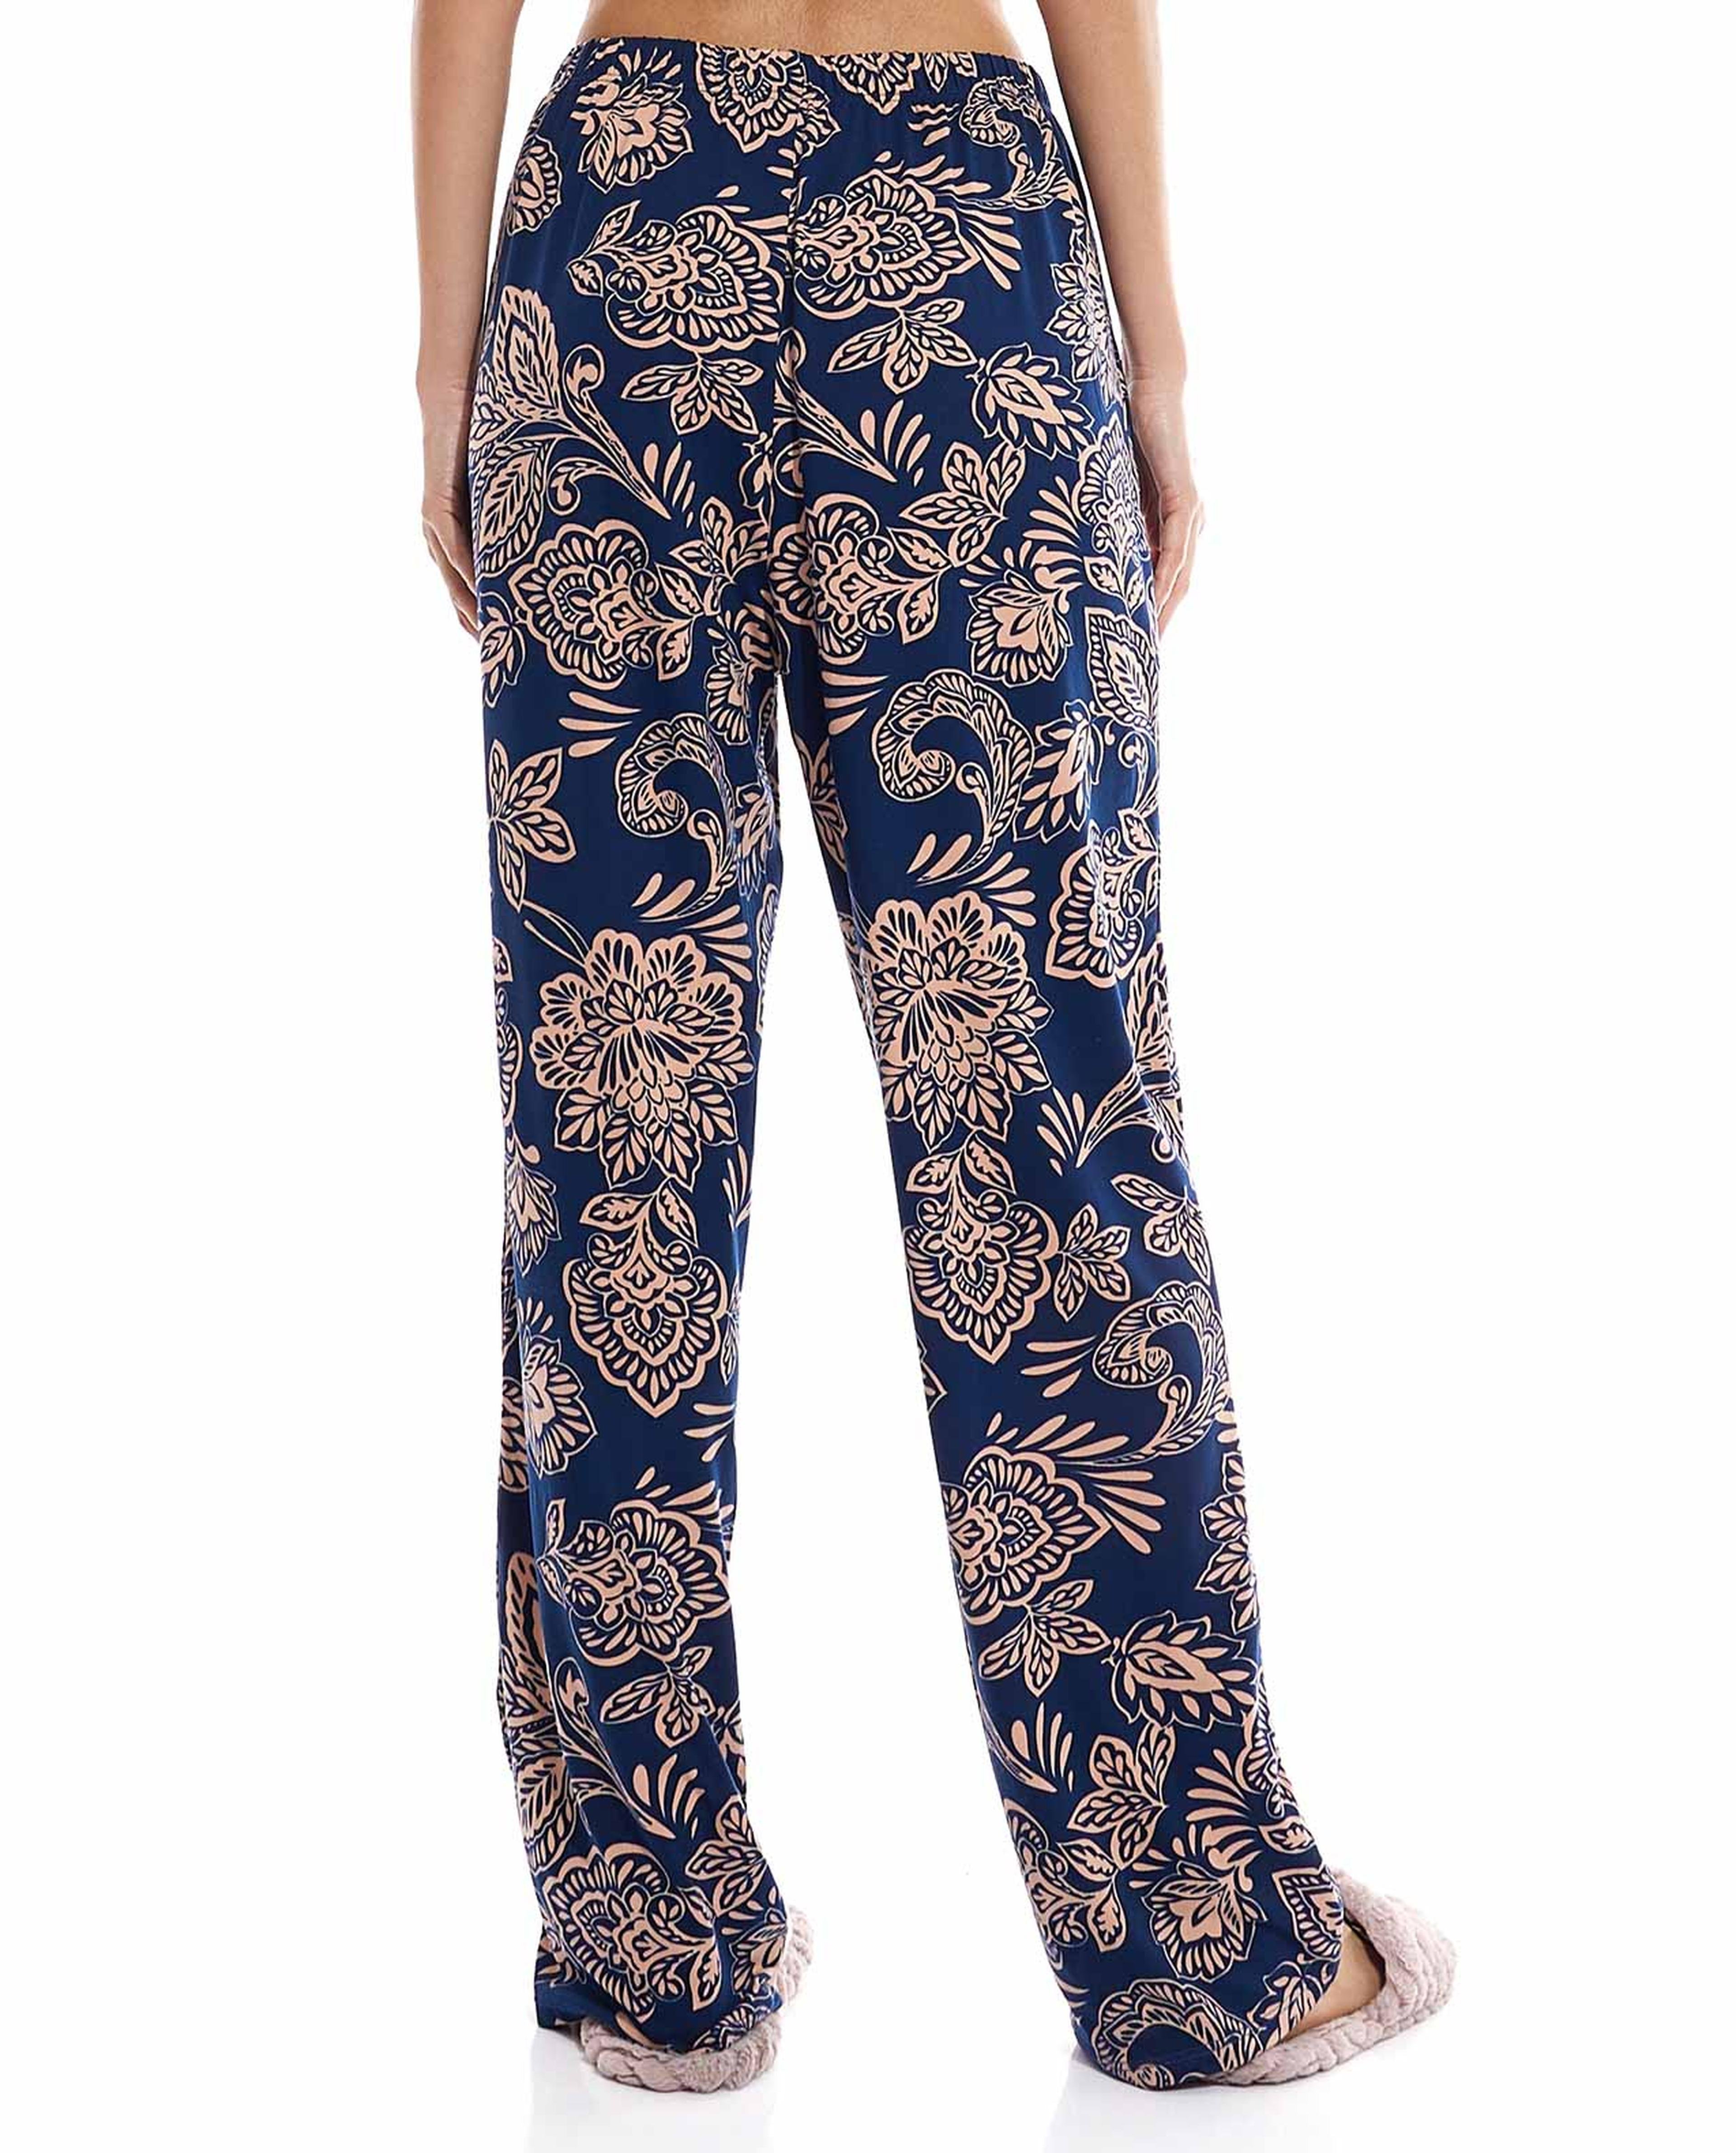 Patterned Lounge Pants with Elastic Waist